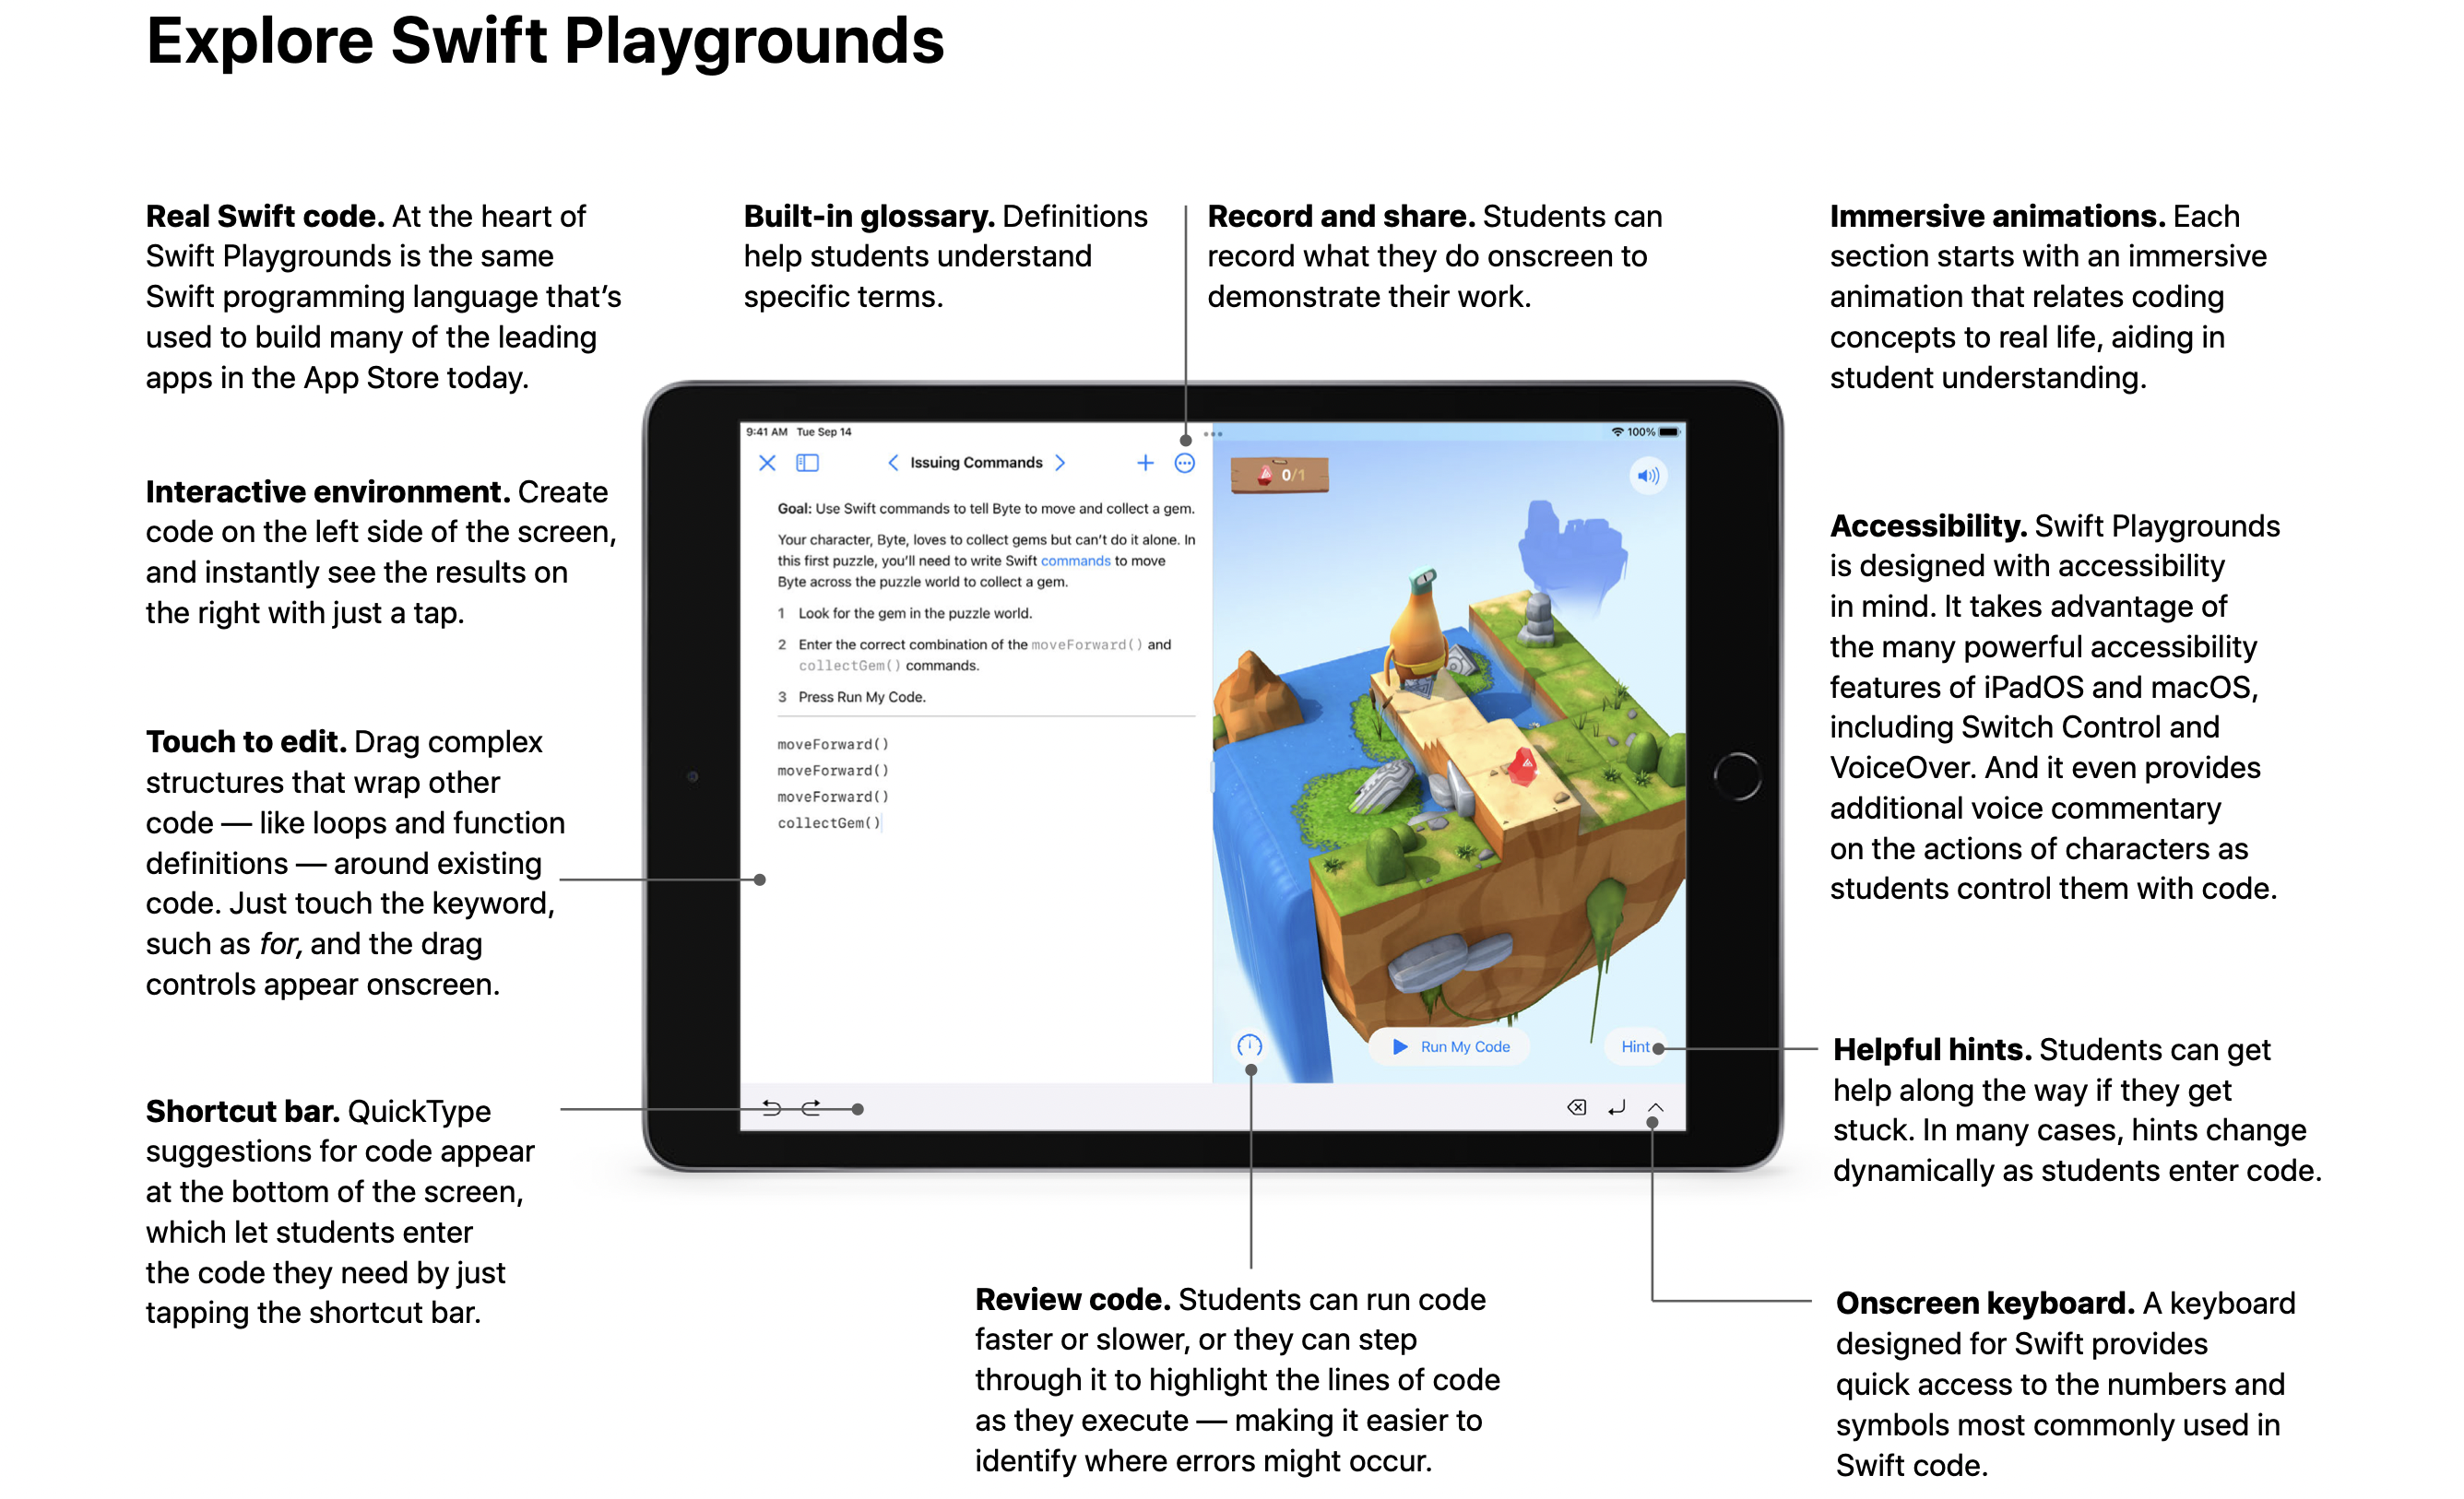 Playgrounds overview